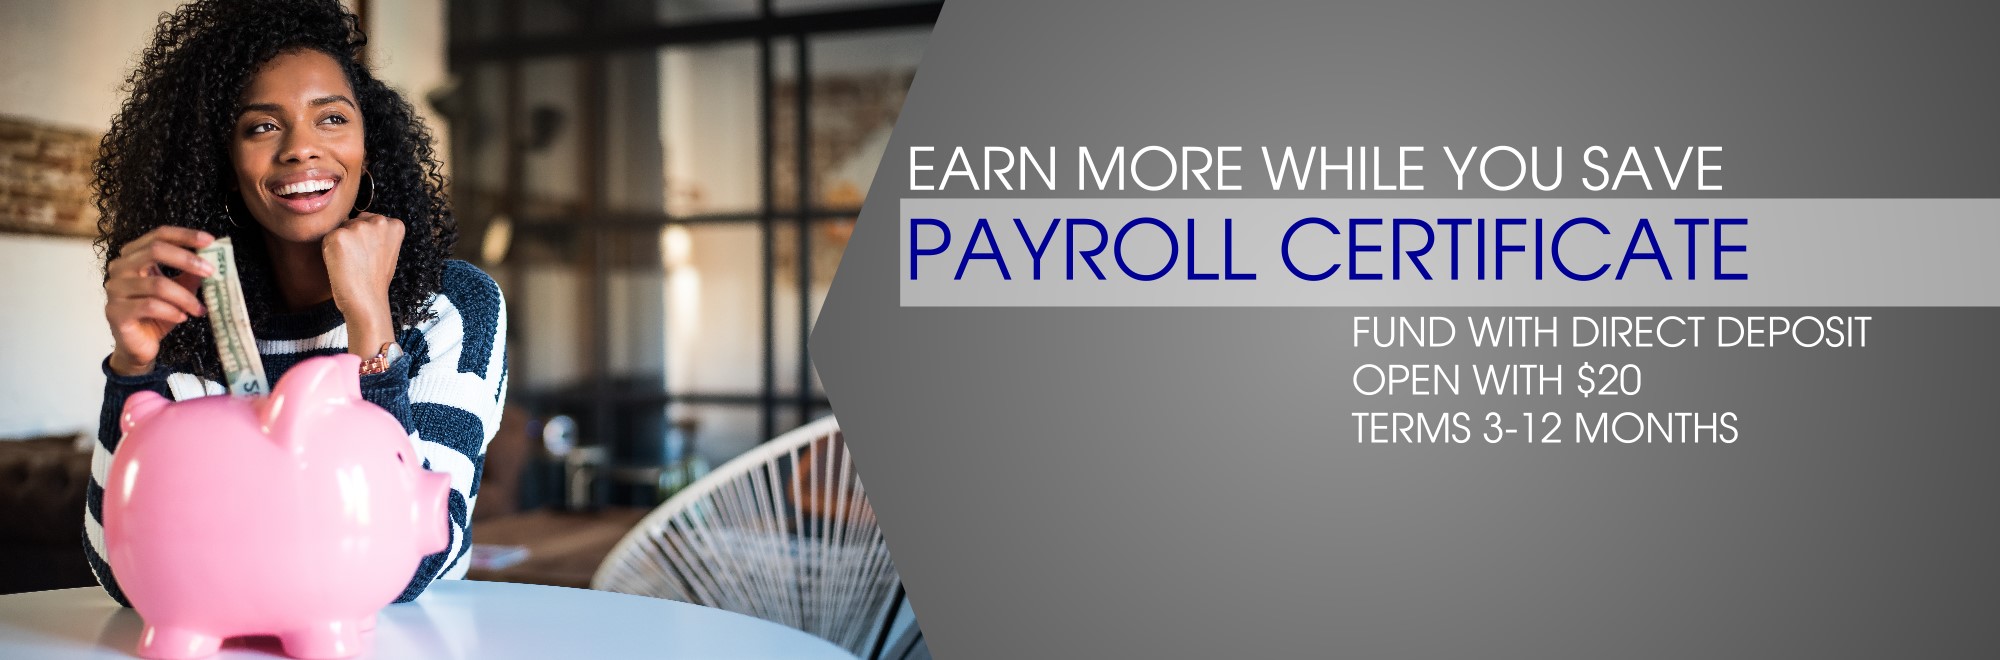 Earn more while you save Payroll Certificate Fund with direct deposit, open with $20 Terms 3-12 months